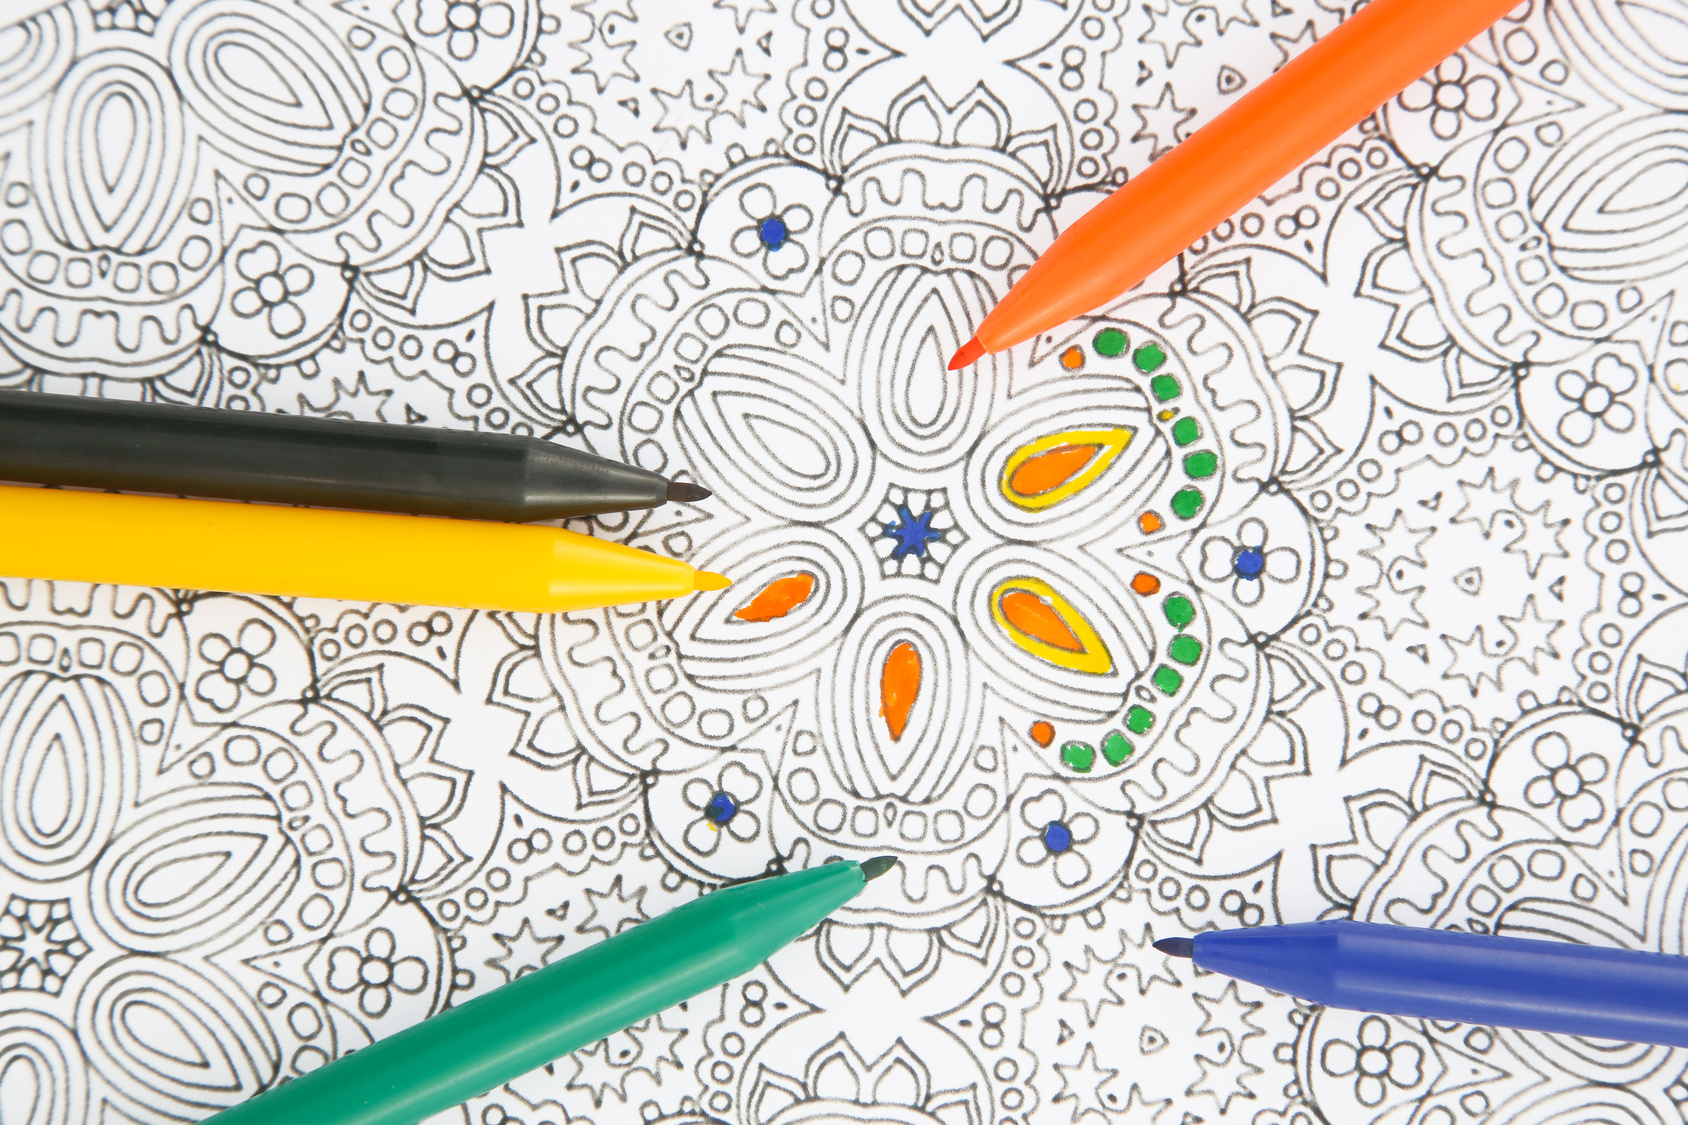 Copyright law and adult coloring books